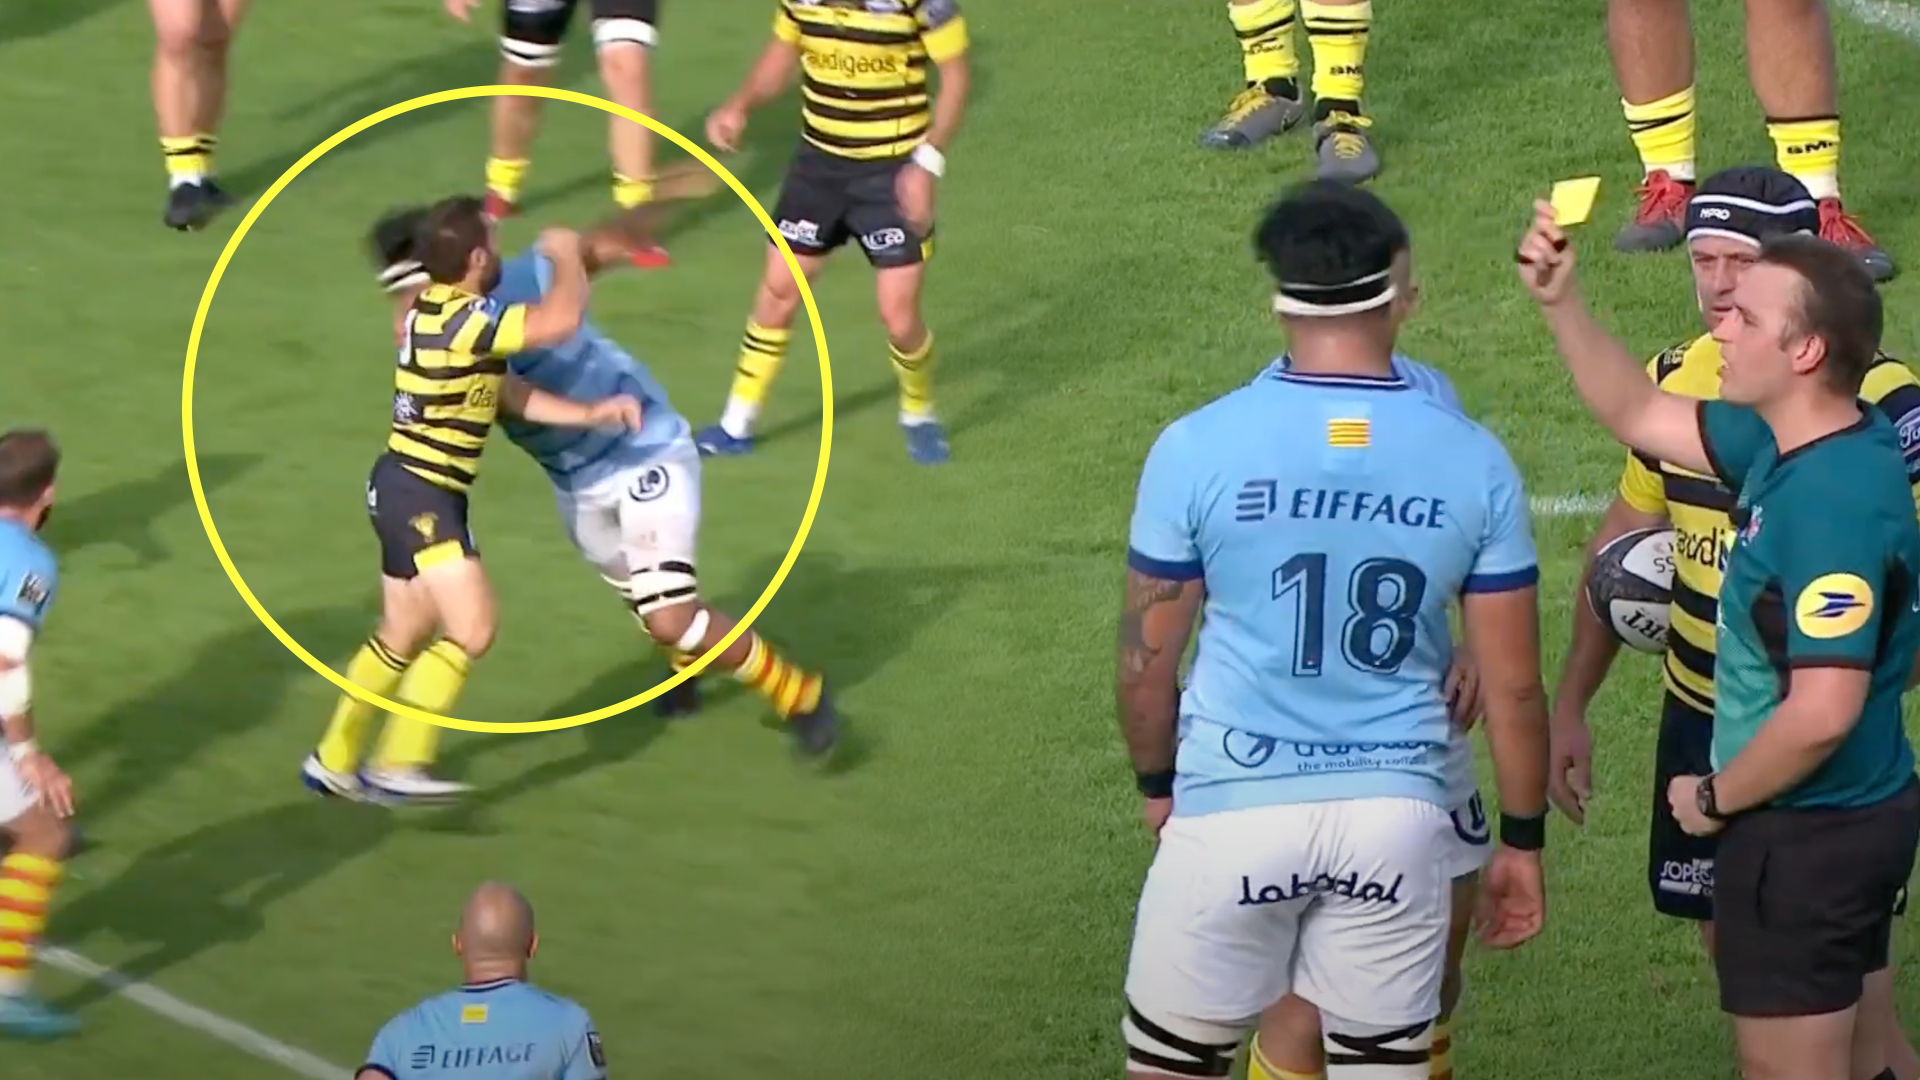 Second row violently assaults defenceless scrum-half... only gets a yellow